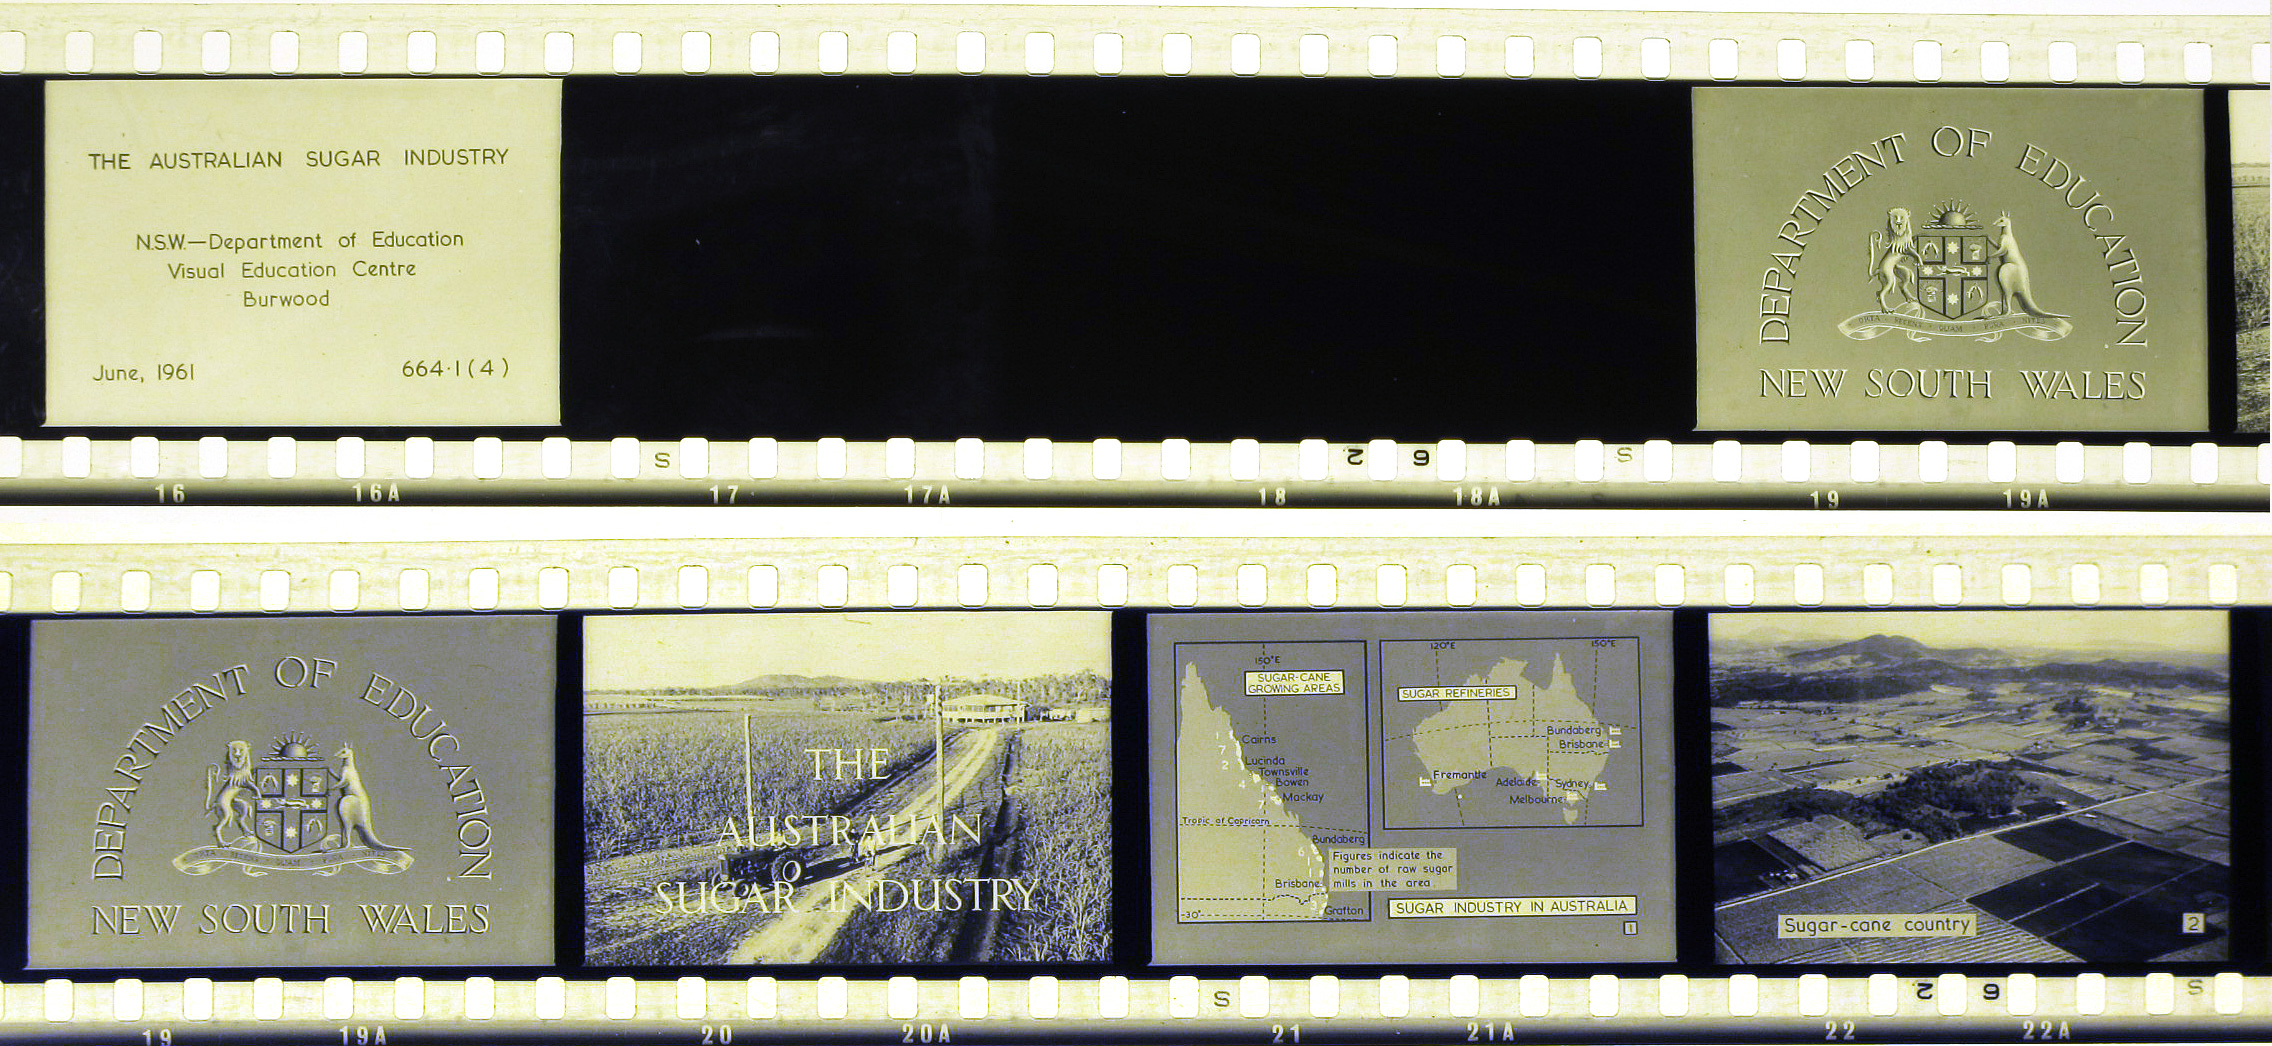 Six frames from a celluloid film strip featuring introductory pages, maps and photographs of sugar-cane growing in New South Wales.